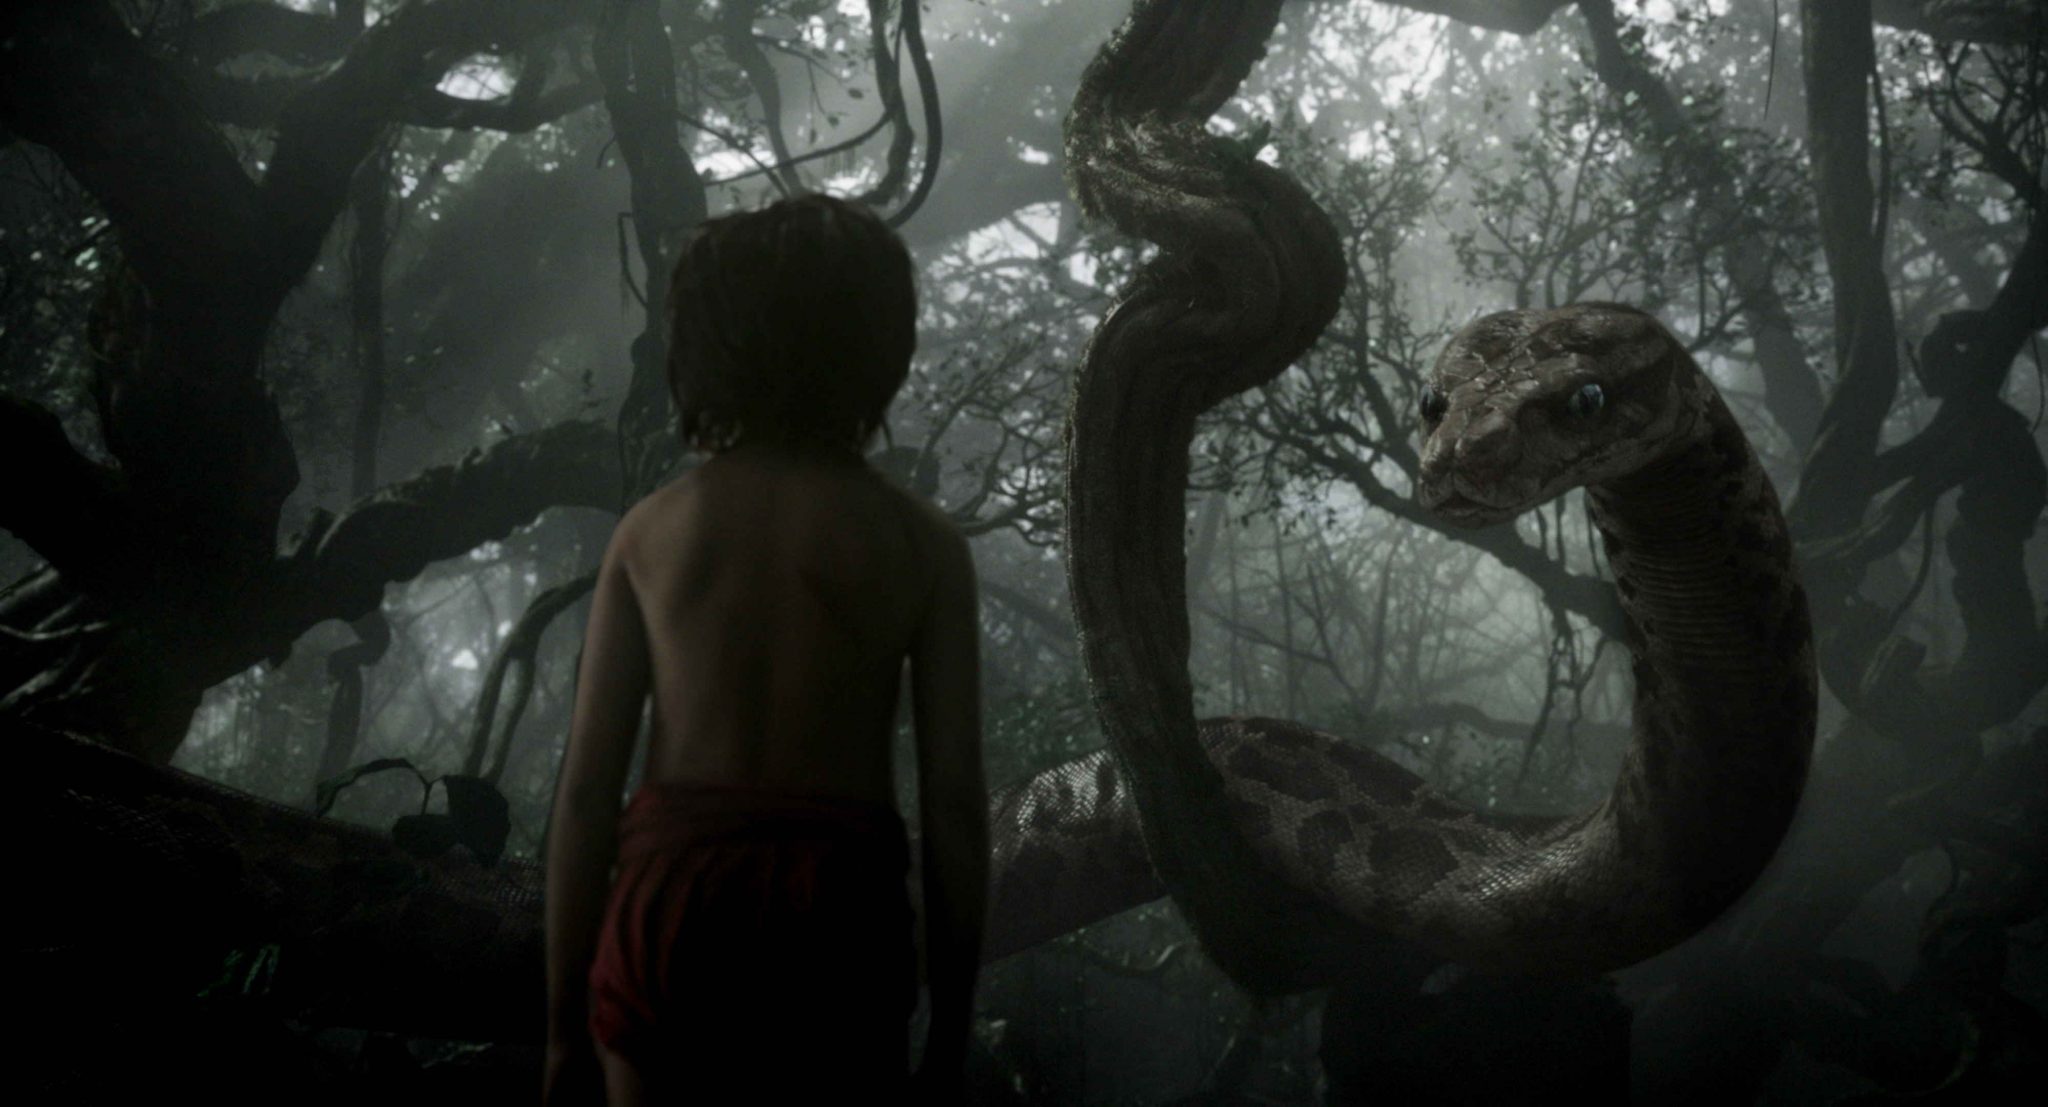 Publicity still of Neel Sethi in The Jungle Book (2016).